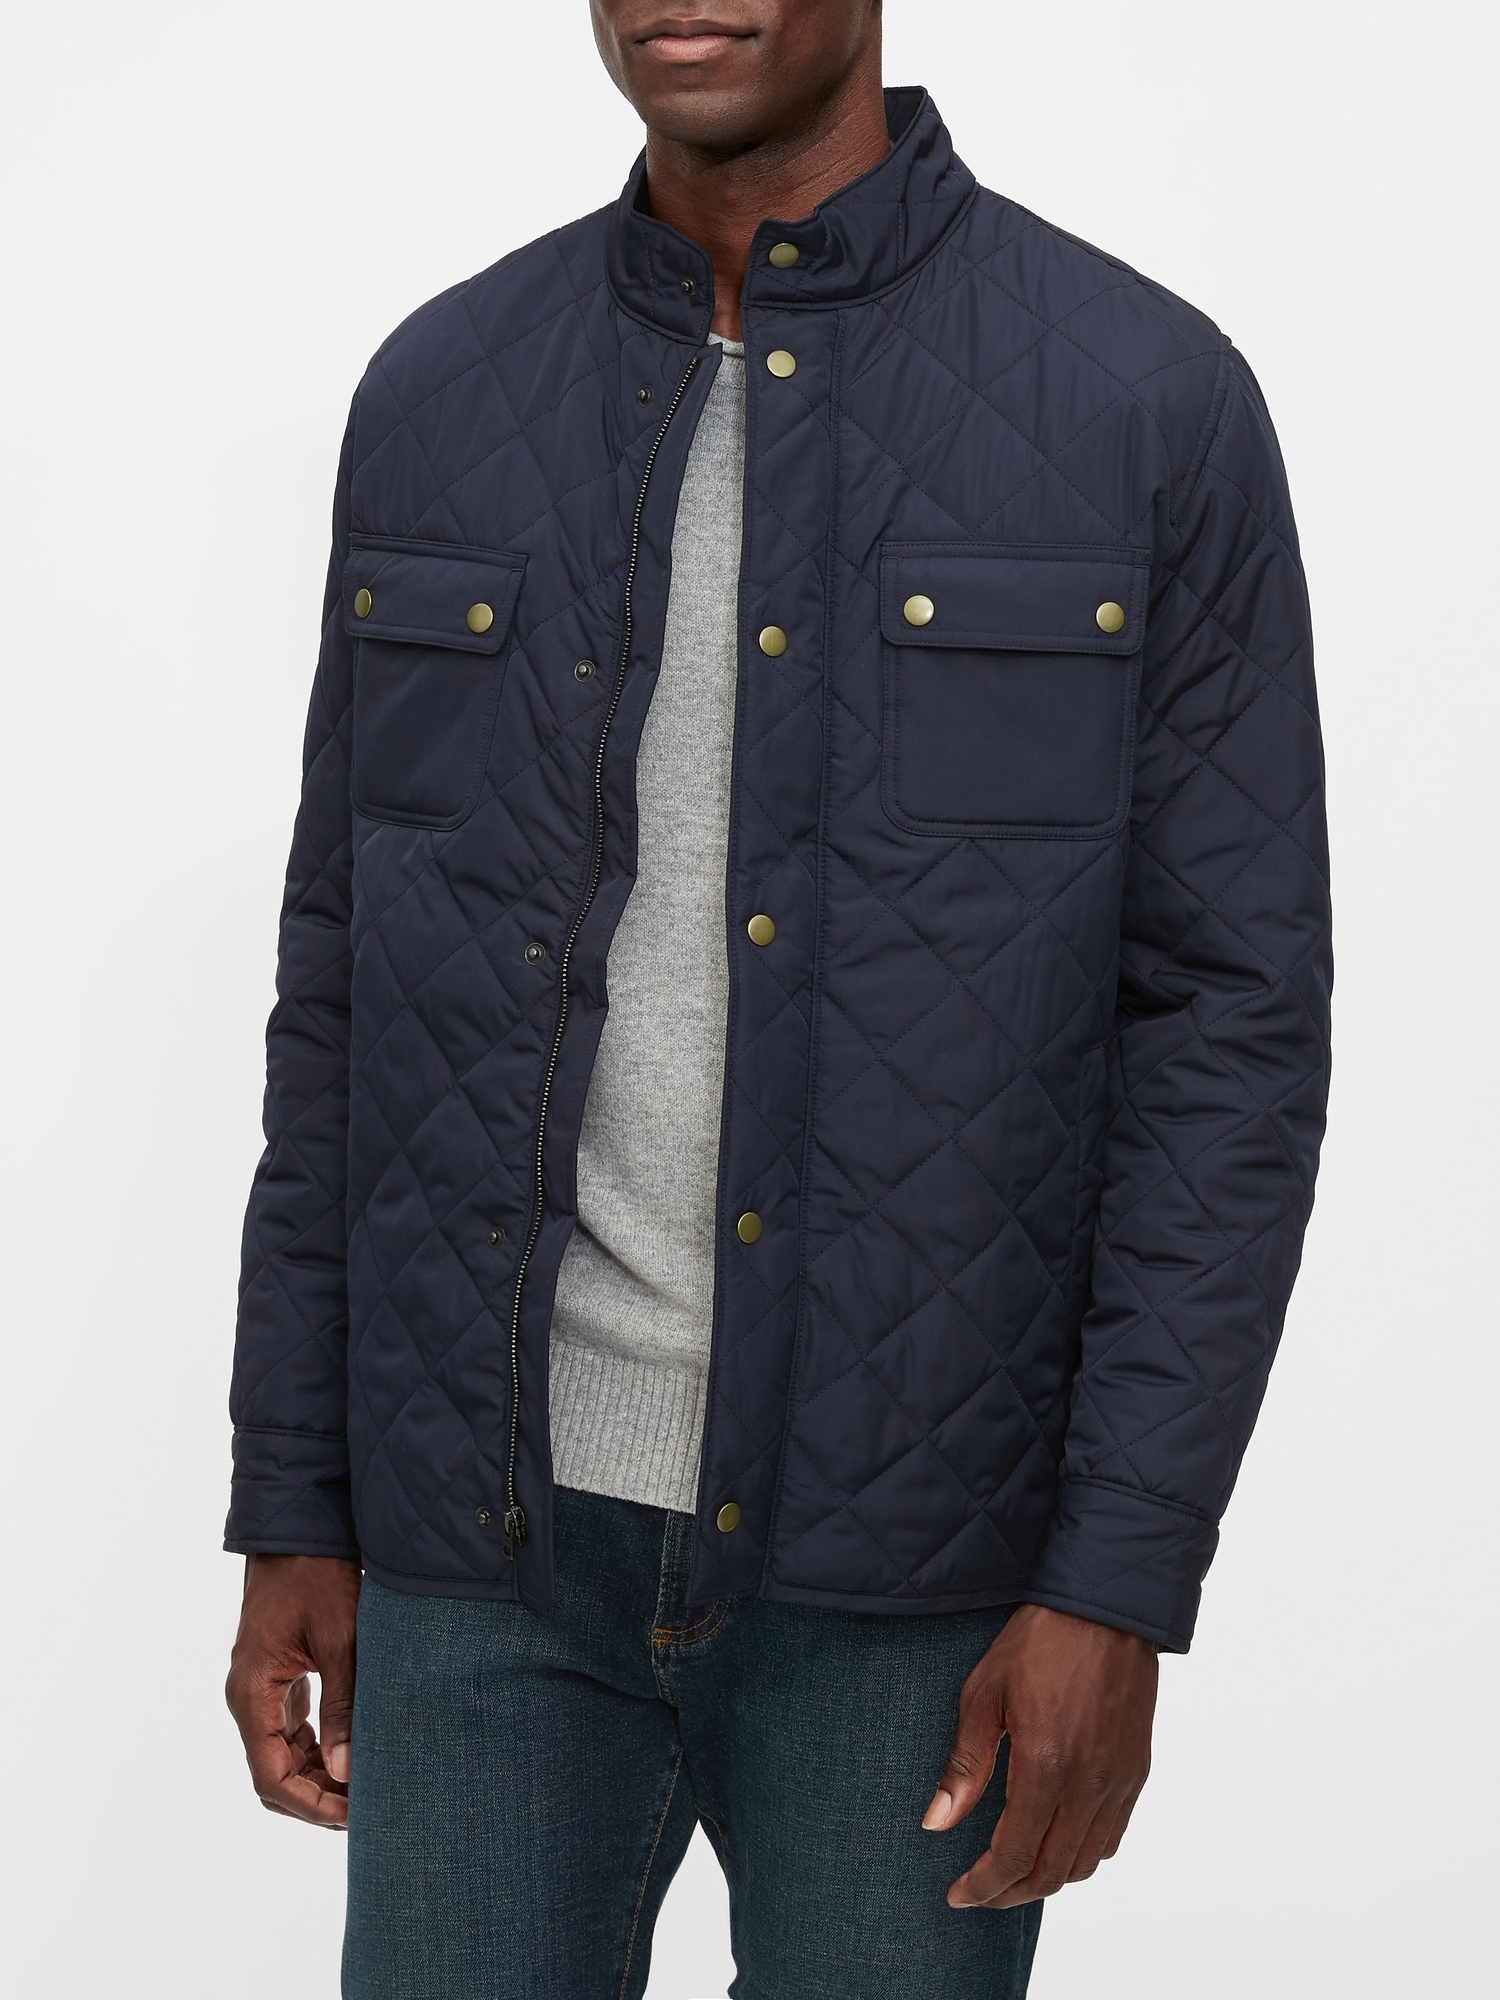 gap quilted jacket